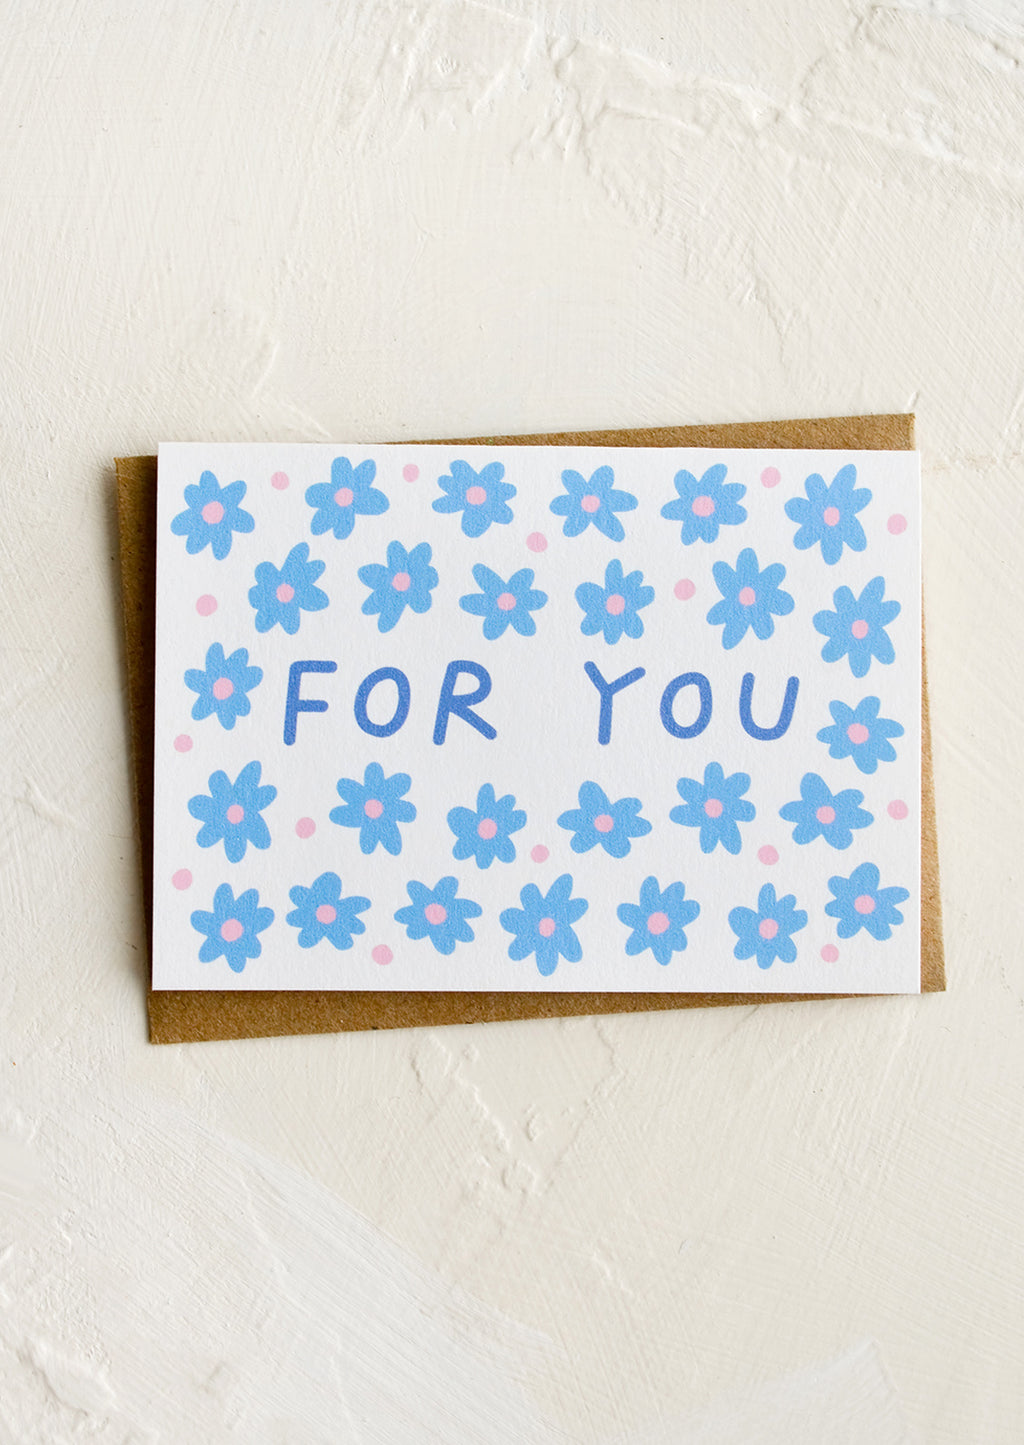 For You: A mini greeting card reading "FOR YOU" with flower print.